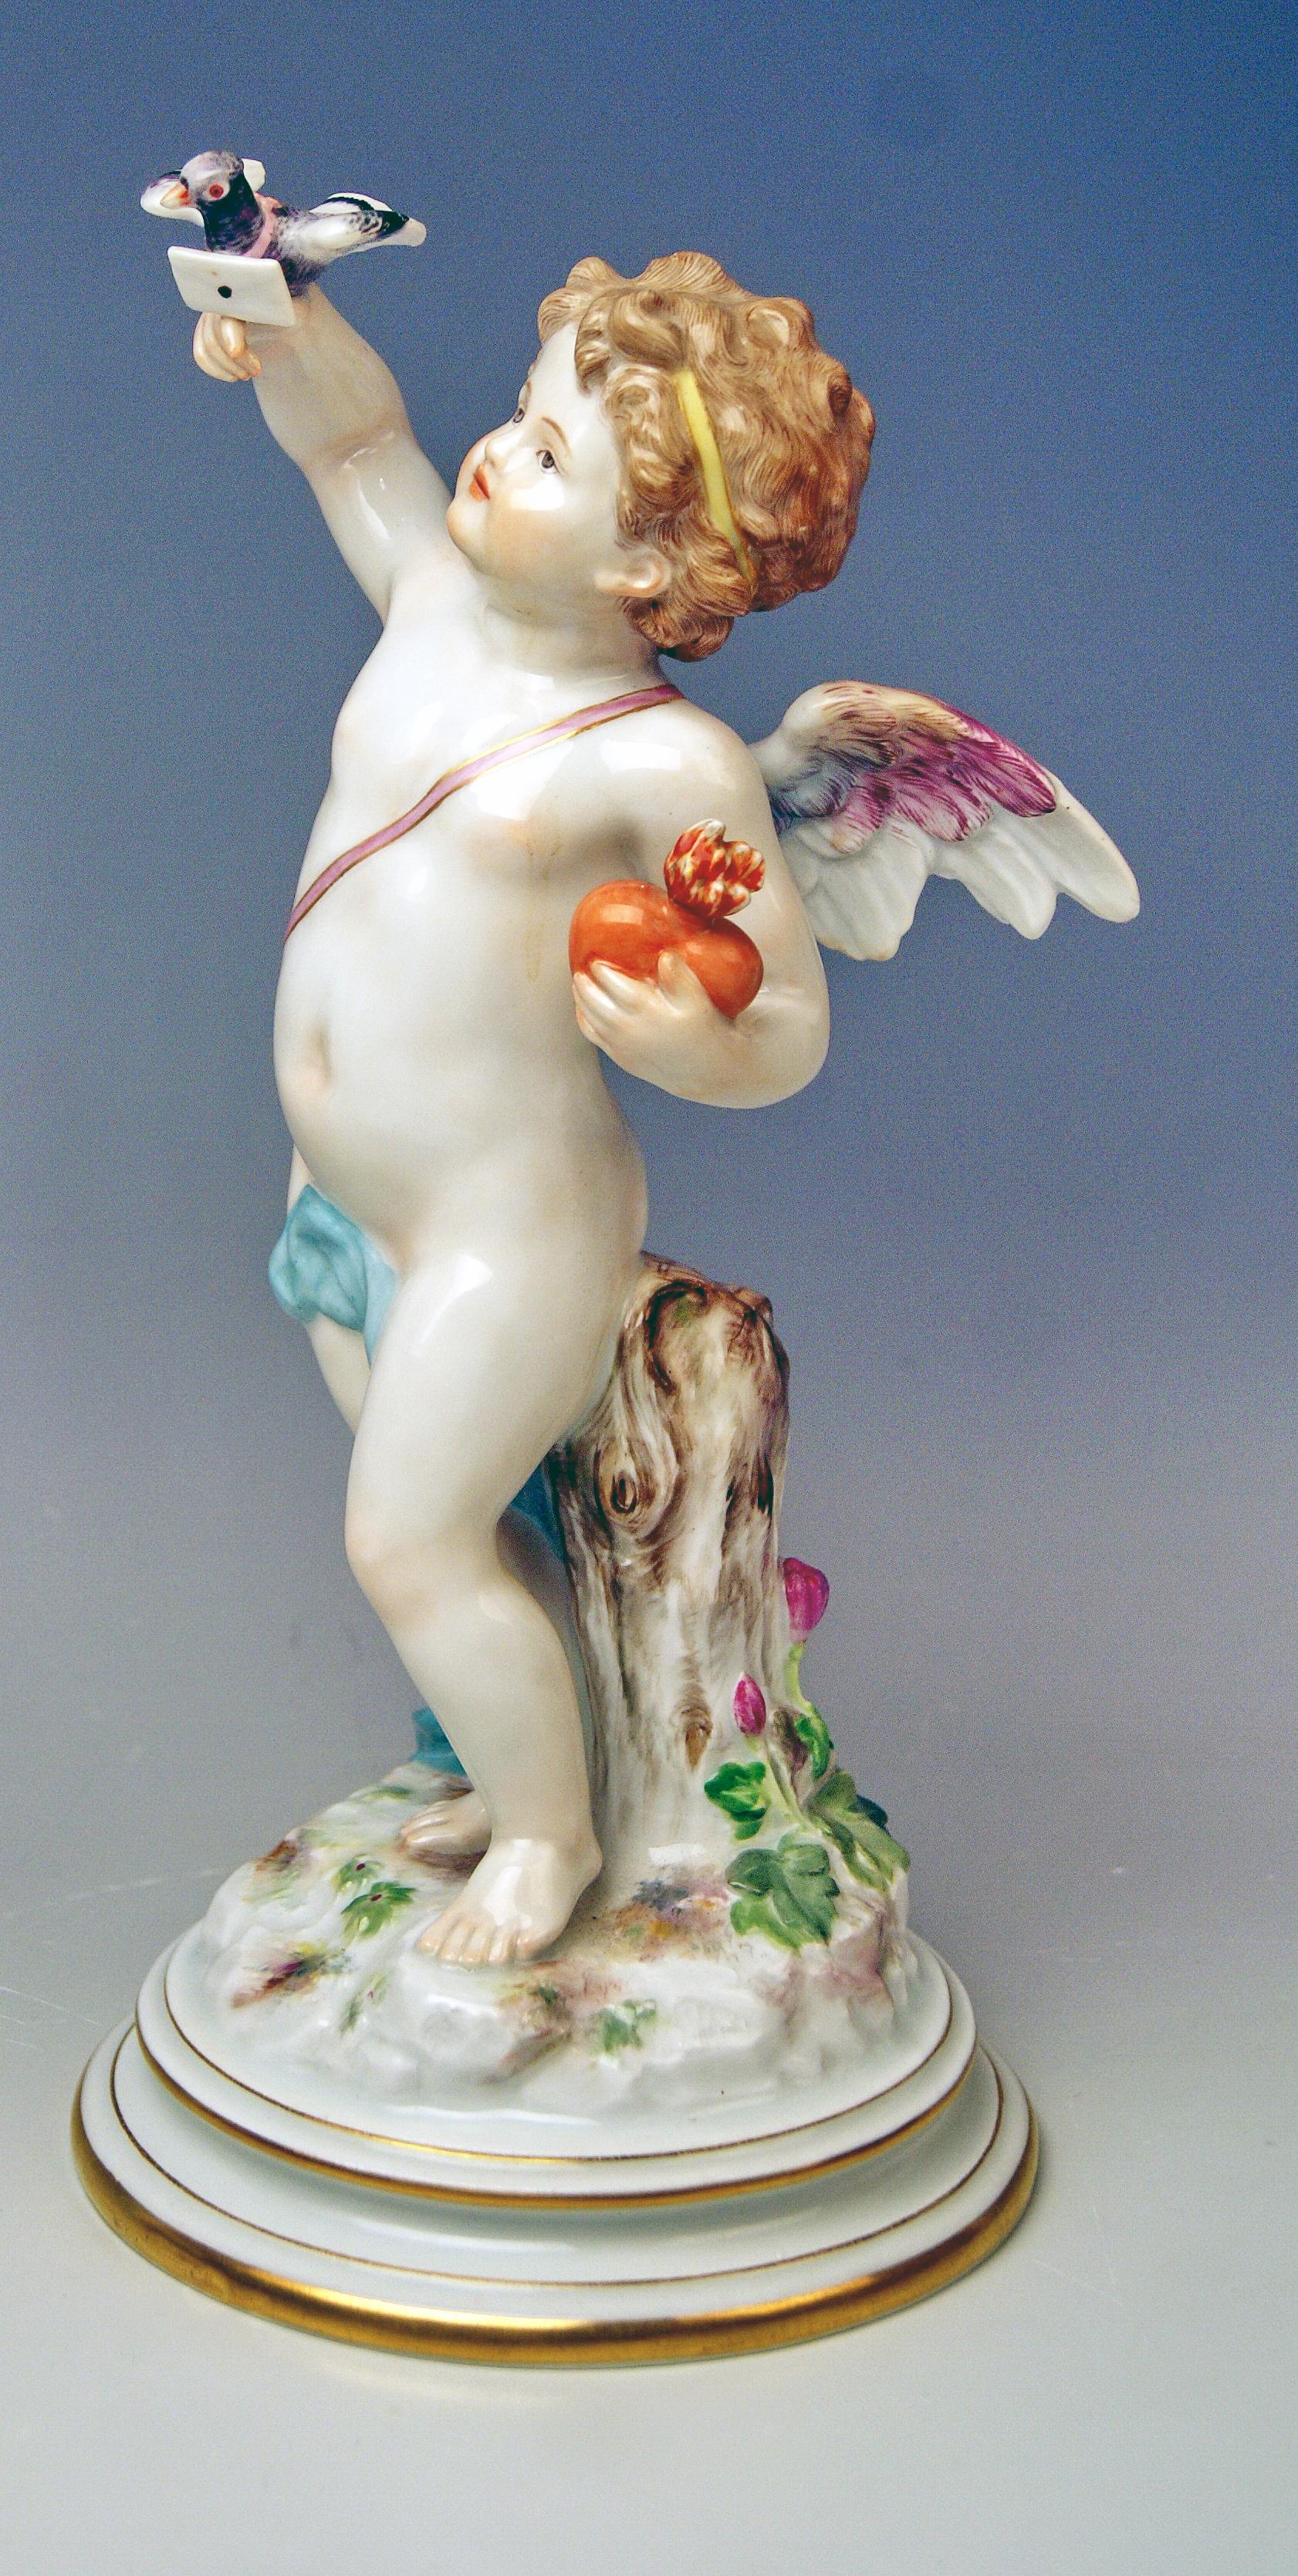 Meissen tall Cupid figurine: Cherub holding a dove of peace with love letter
The details are stunningly sculptured = finest modelling

Manufactory: Meissen 
Dating: Made 1880-1890
Hallmarked: Meissen mark with pommels on hilts (latest 19th